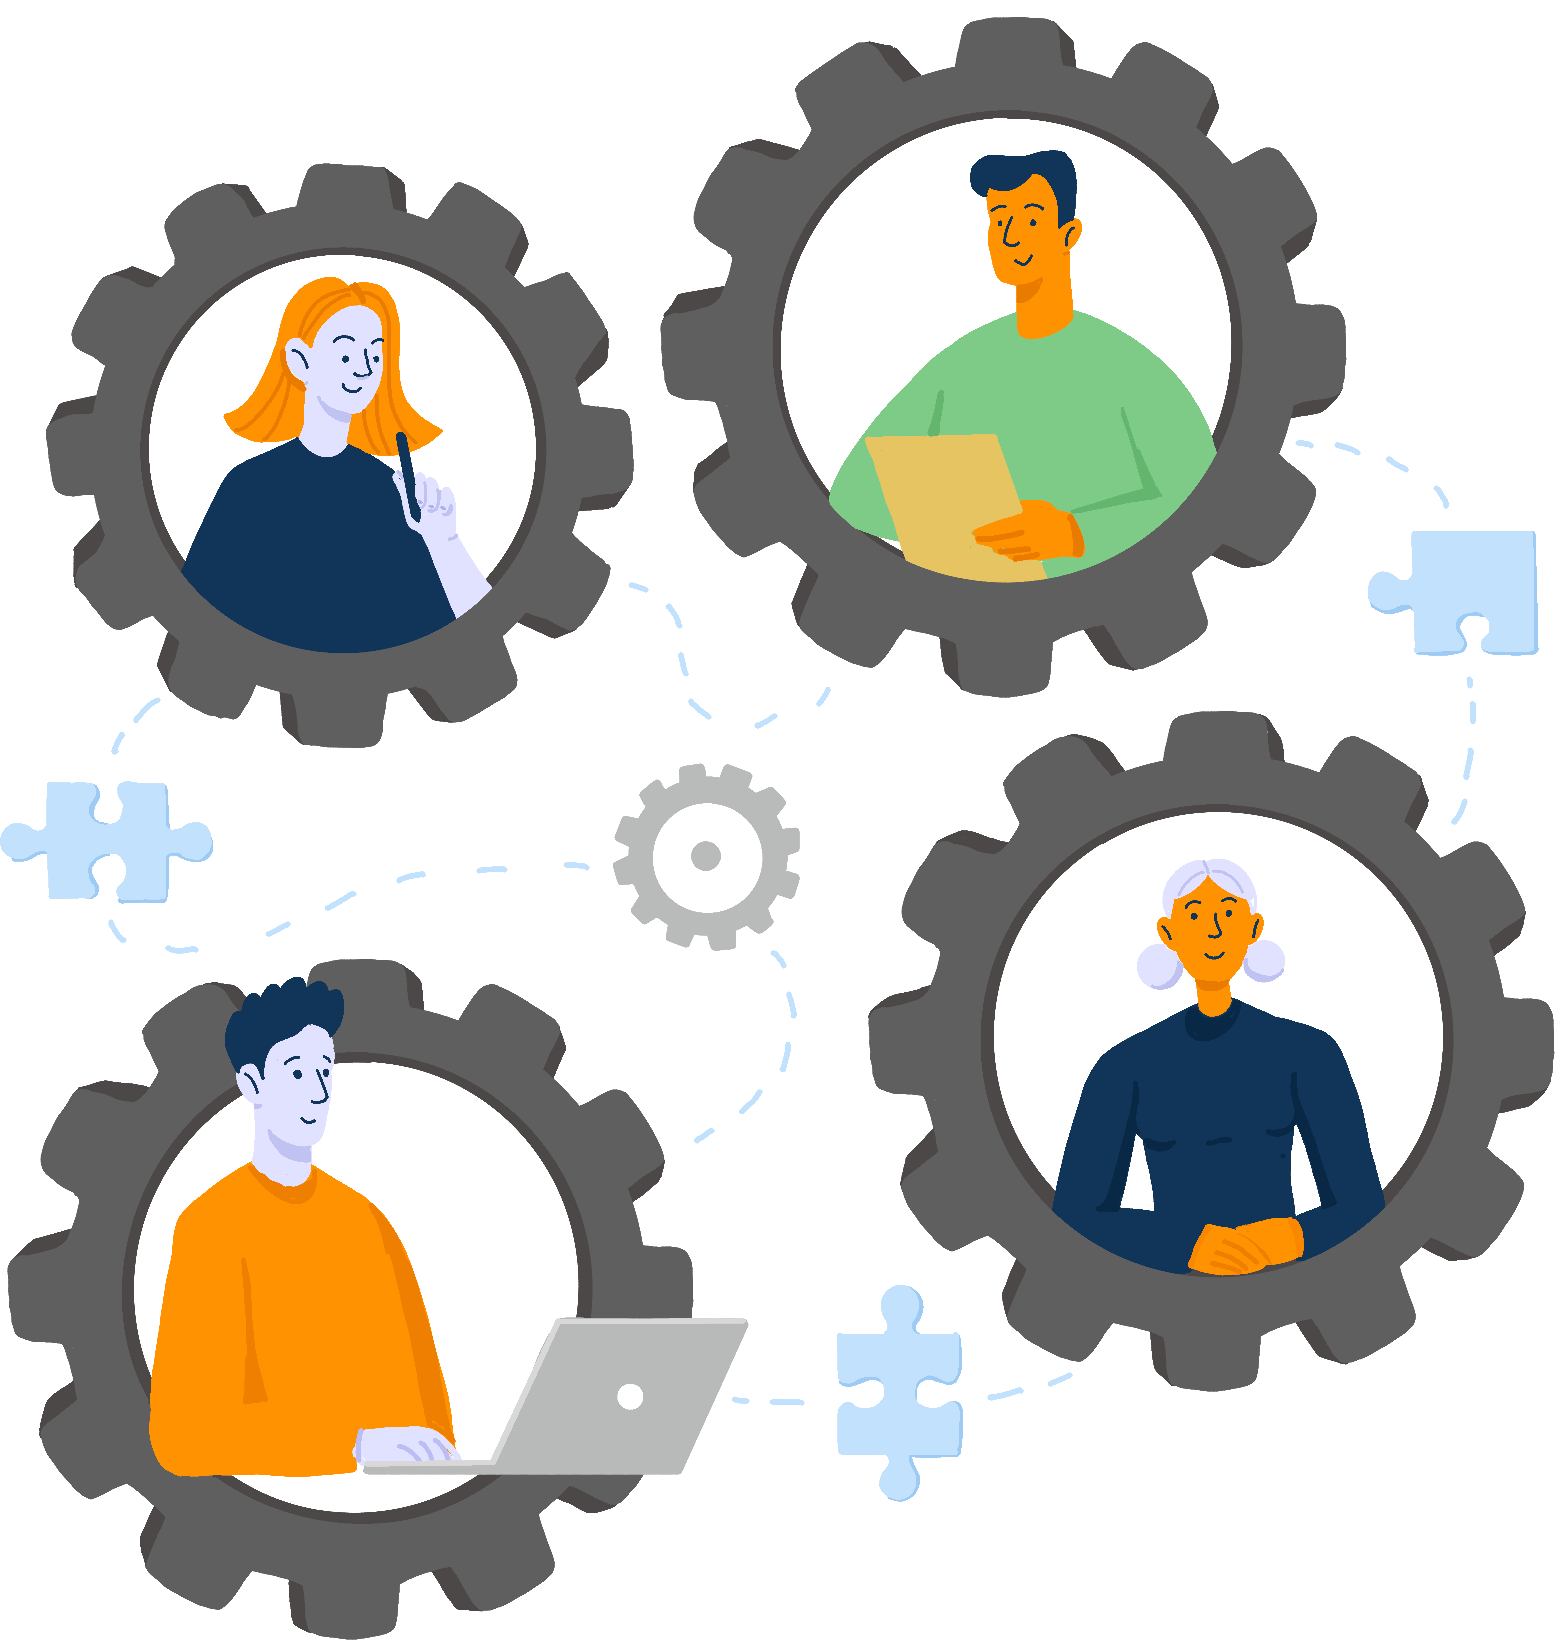 Team working together within an abstract gears illustration